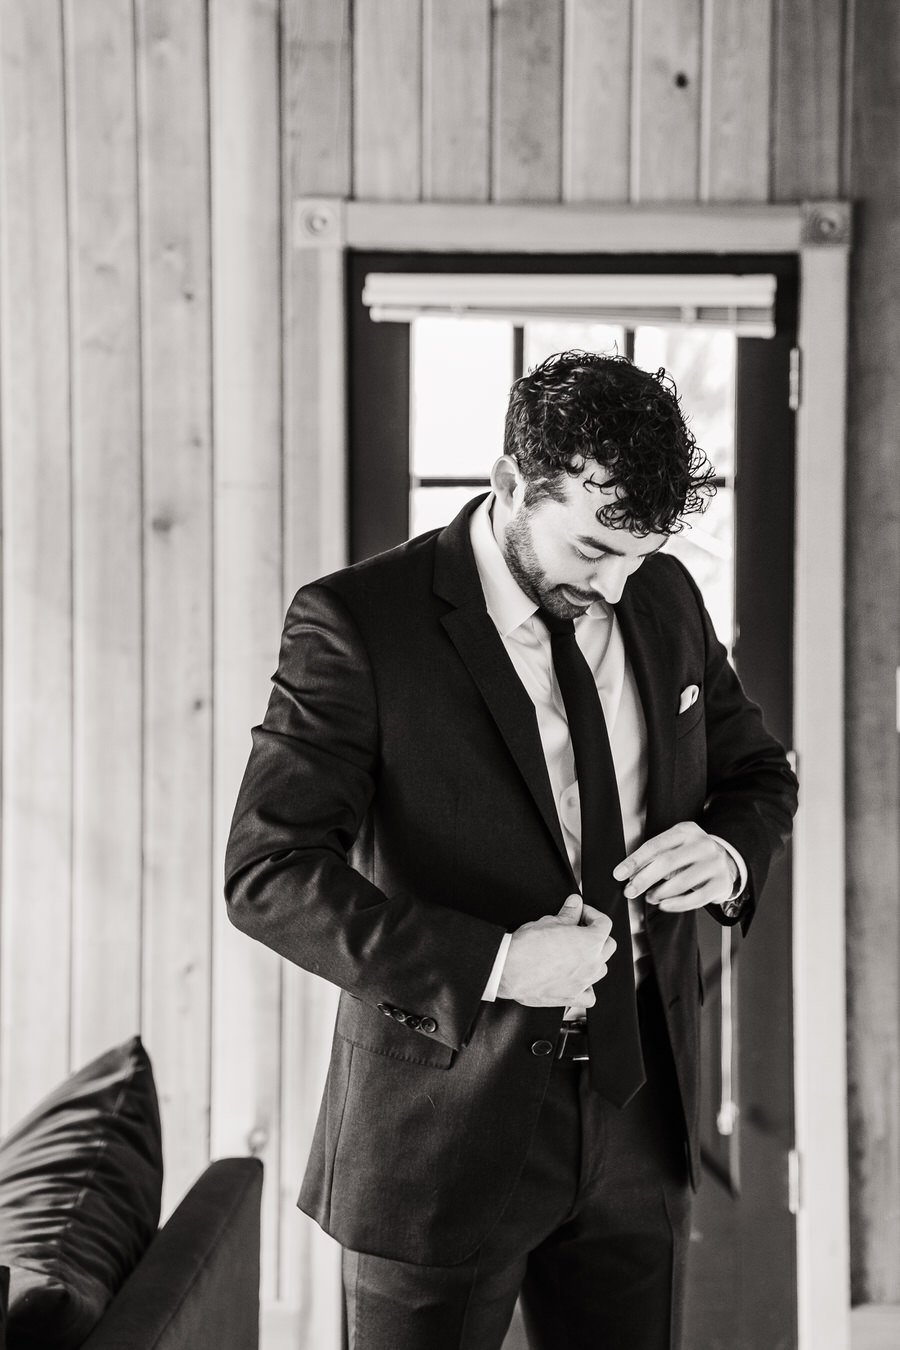 A groom buttons his jacket on his wedding day